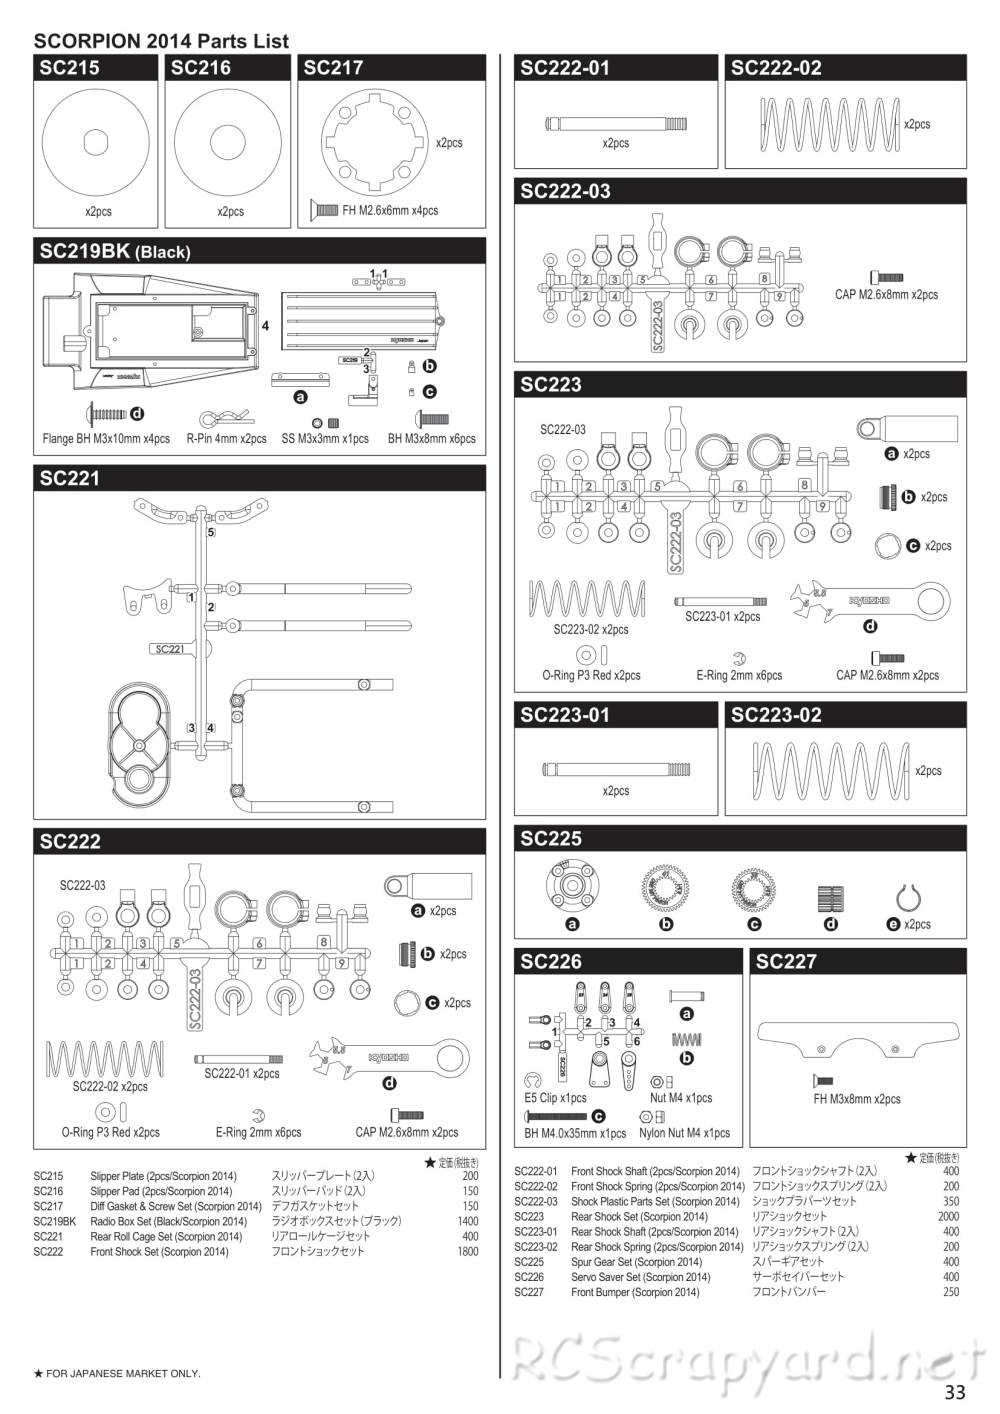 Kyosho - Beetle 2014 - 30614 - RC Model Parts